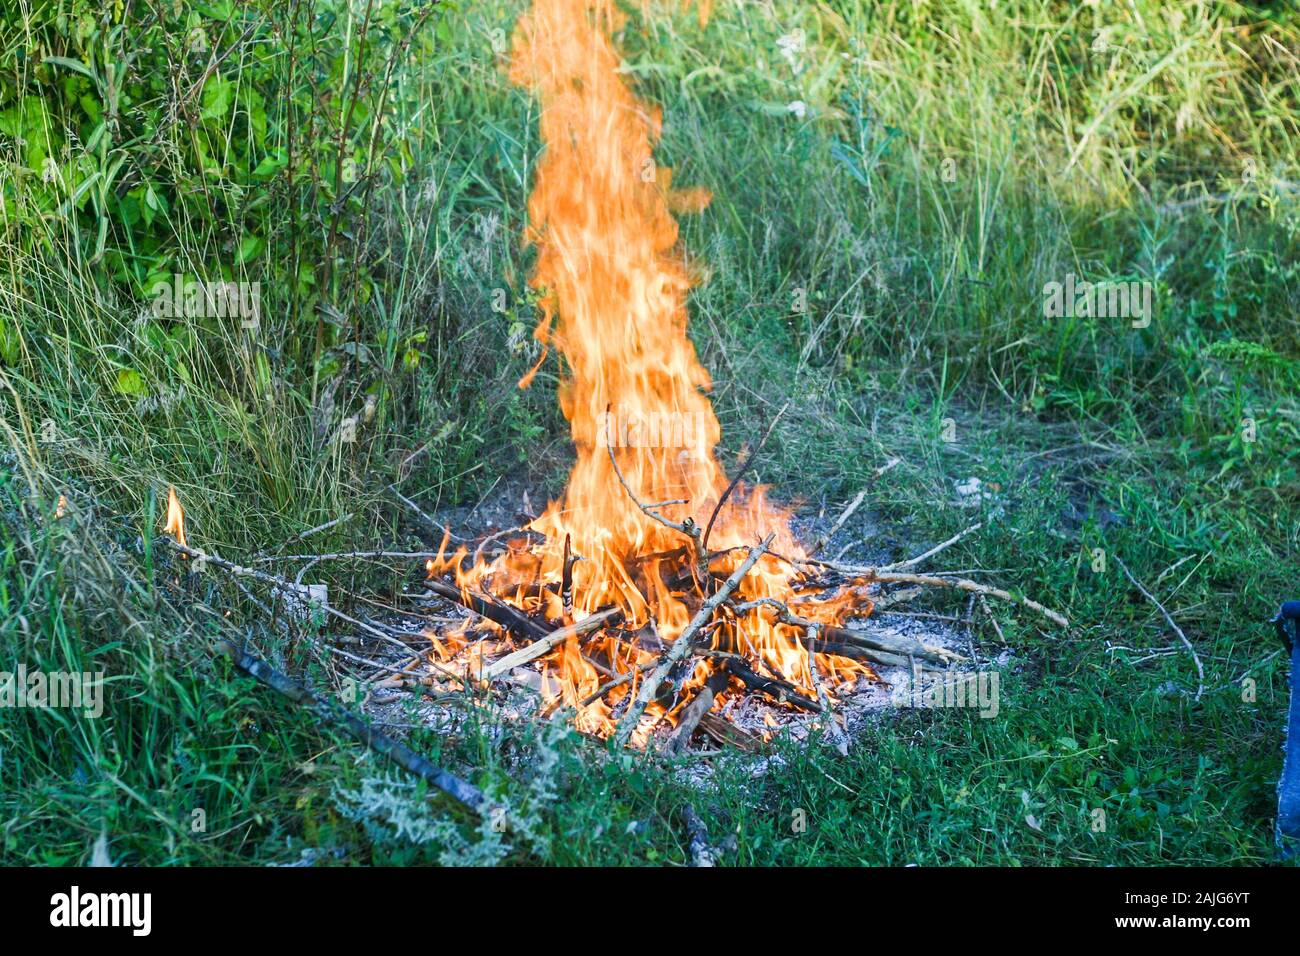 Campfire prepared for barbecue in a forest Stock Photo